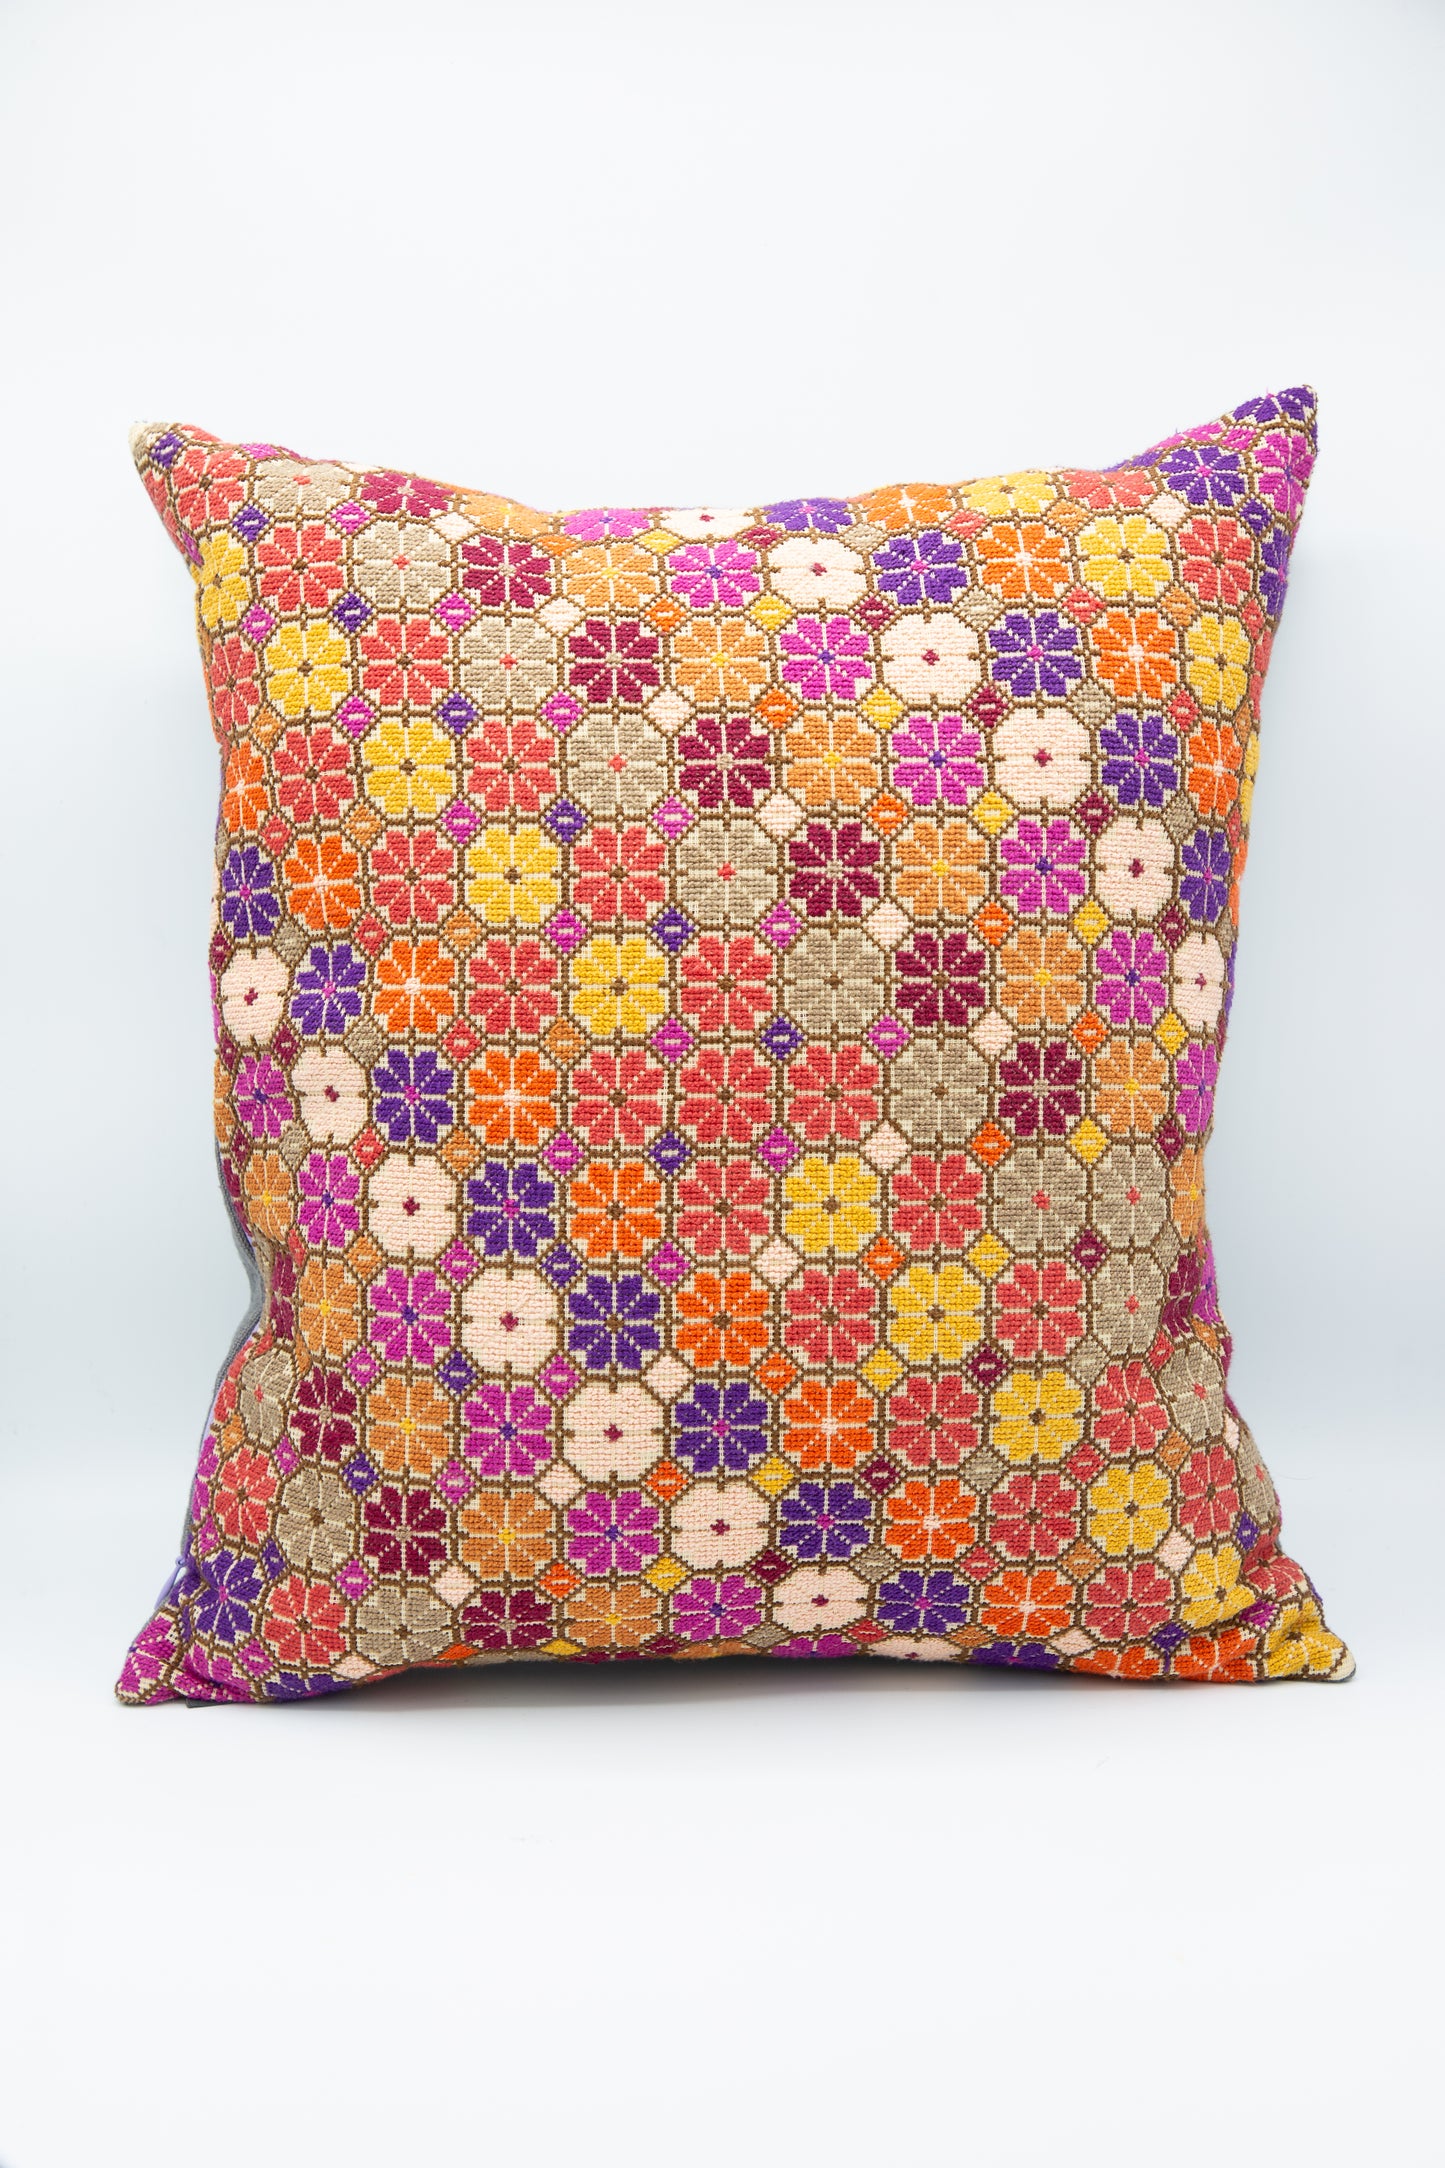 A Damask Rose Hand Embroidered Pillow in Autumn, crafted by an artisan from Kissweh.